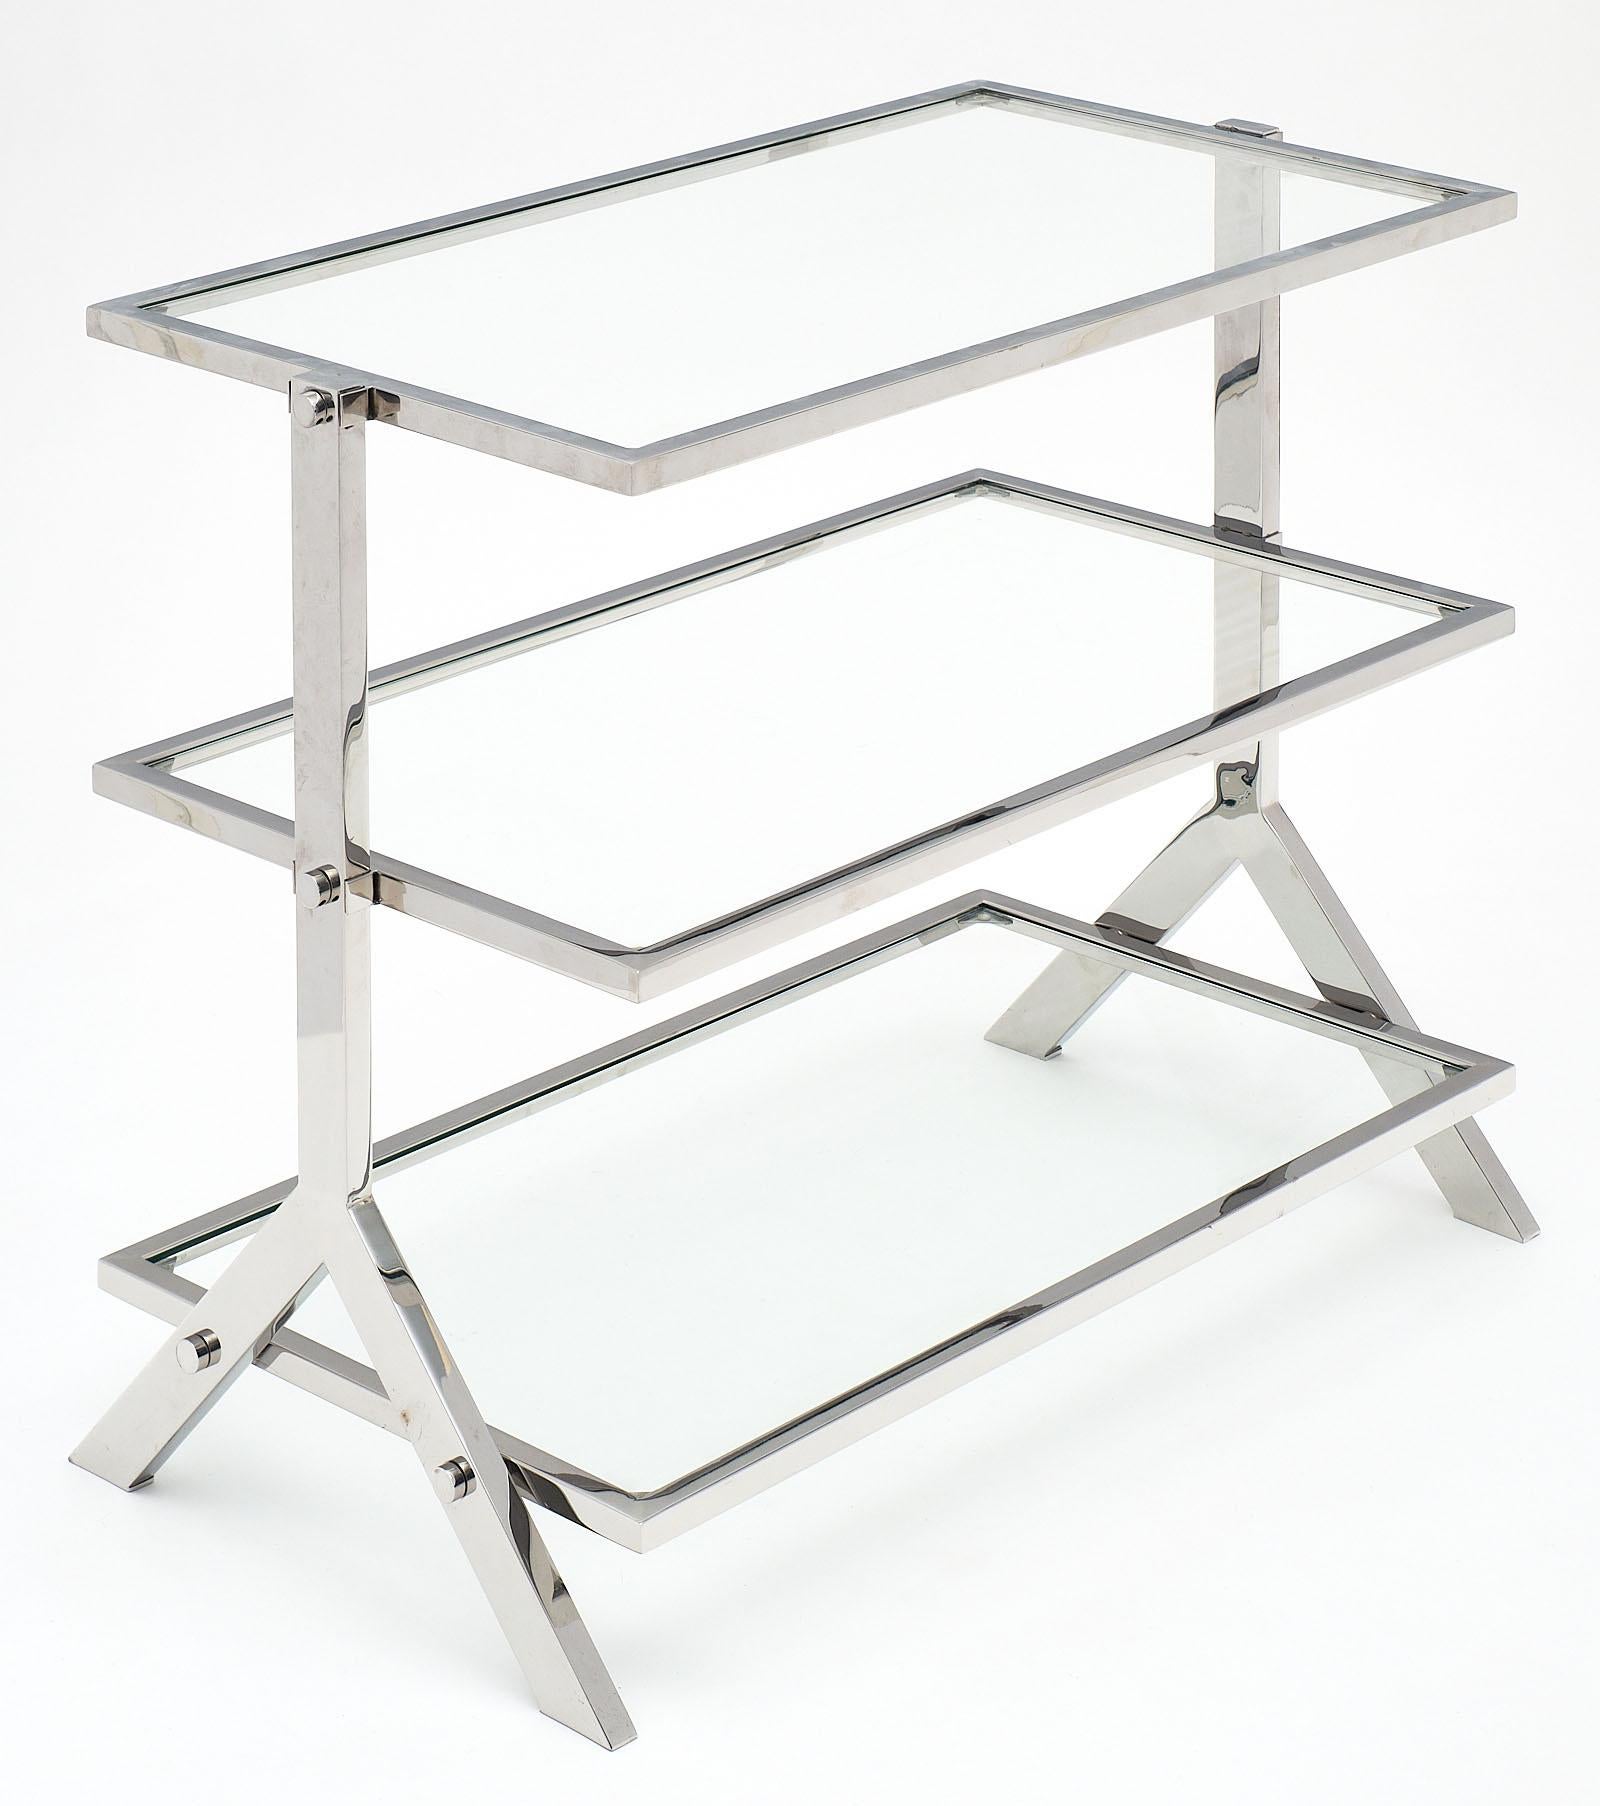 A sleek French chrome and glass console or side table. We loved the architectural lines and balance of this piece. It has three glass shelves inserted in the chromed steel frame.